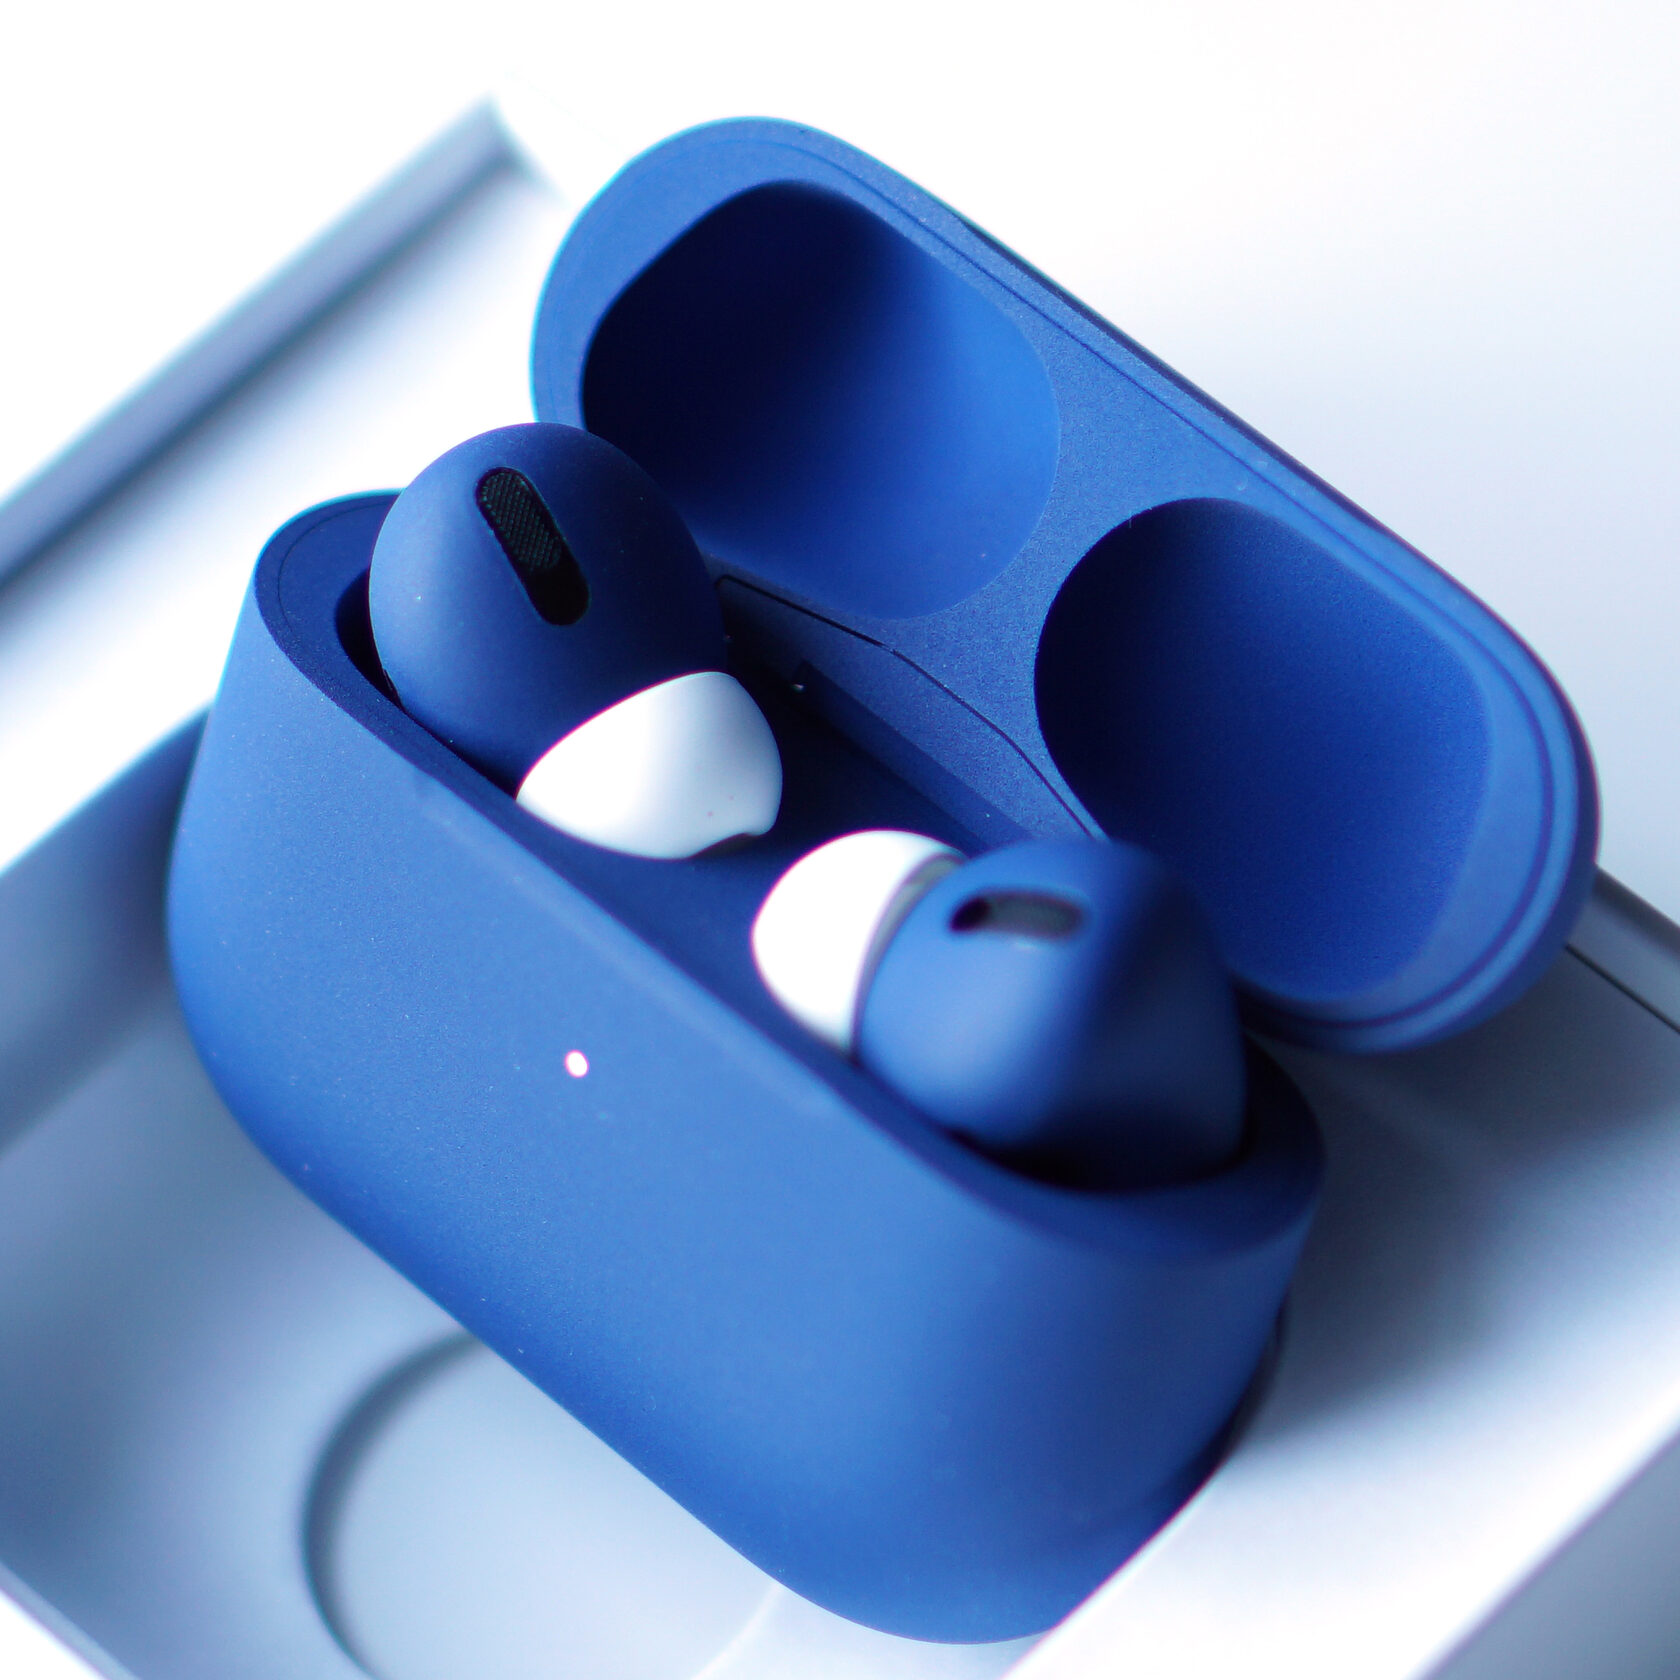 AIRPODS Pro 2. Аирподсы 3. AIRPODS Pro 3. AIRPODS Pro 2 Blue. Airpods красноярск